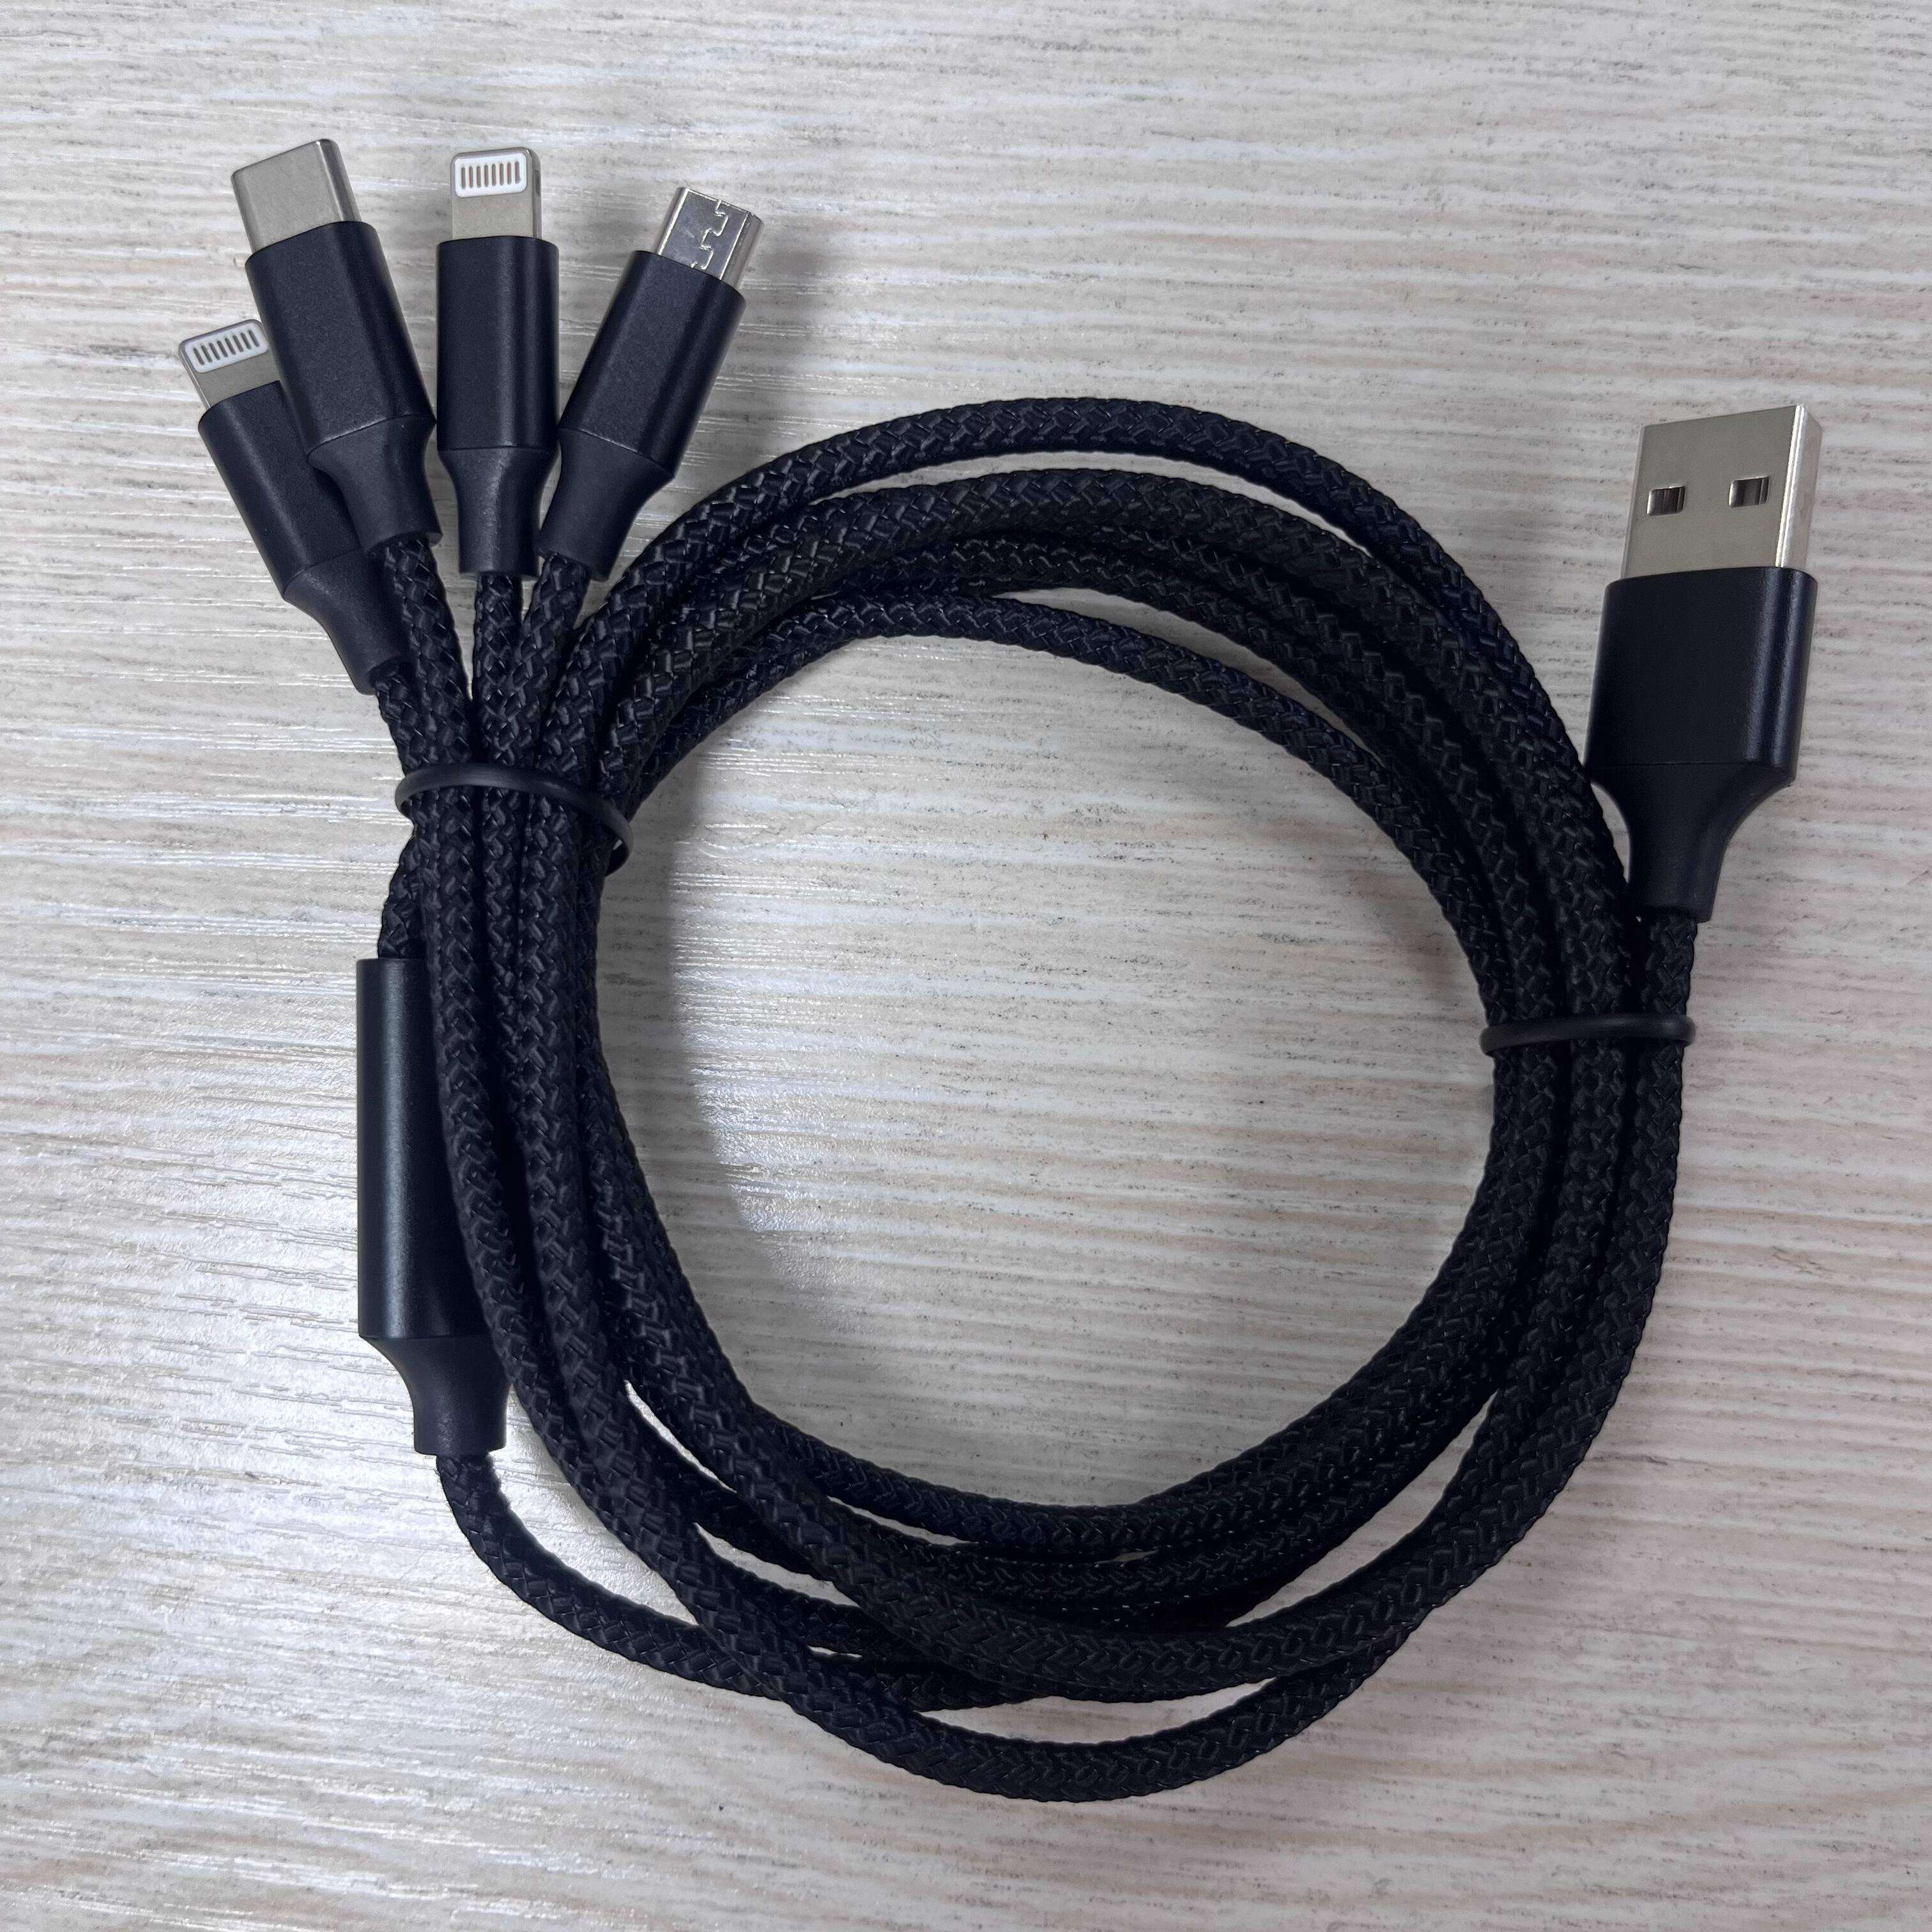 1.2M 4 in 1 Charging Cable for Iphone, Type C and Android UC122